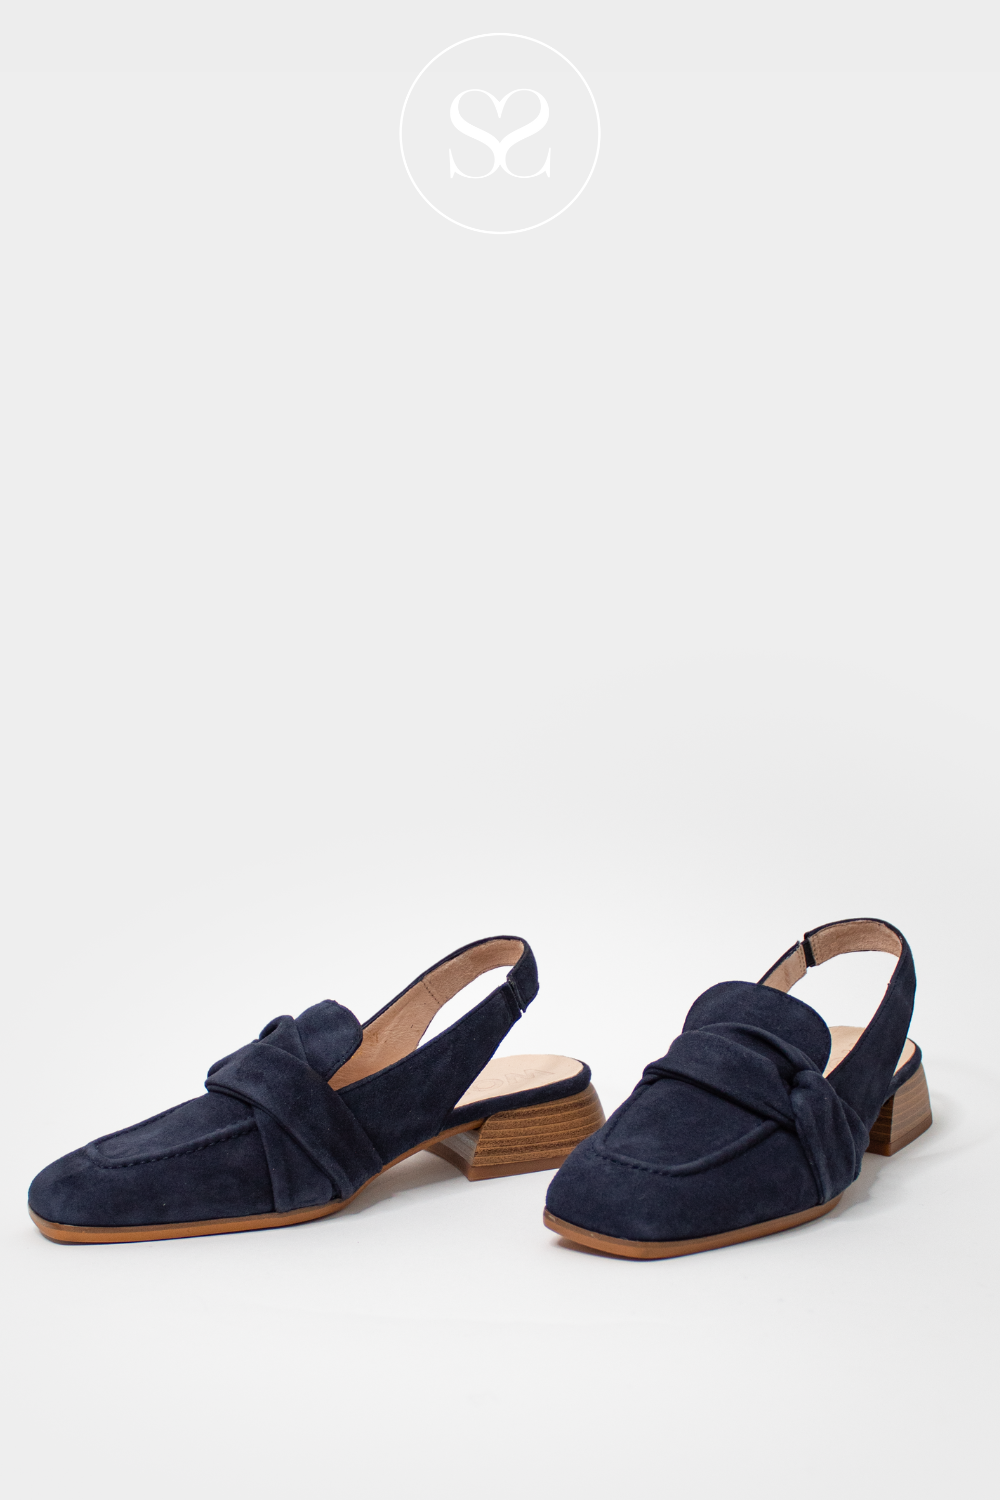 WONDERS C-7120 NAVY SUEDE SLINGBACK LOAFERS WITH BOW DETAIL